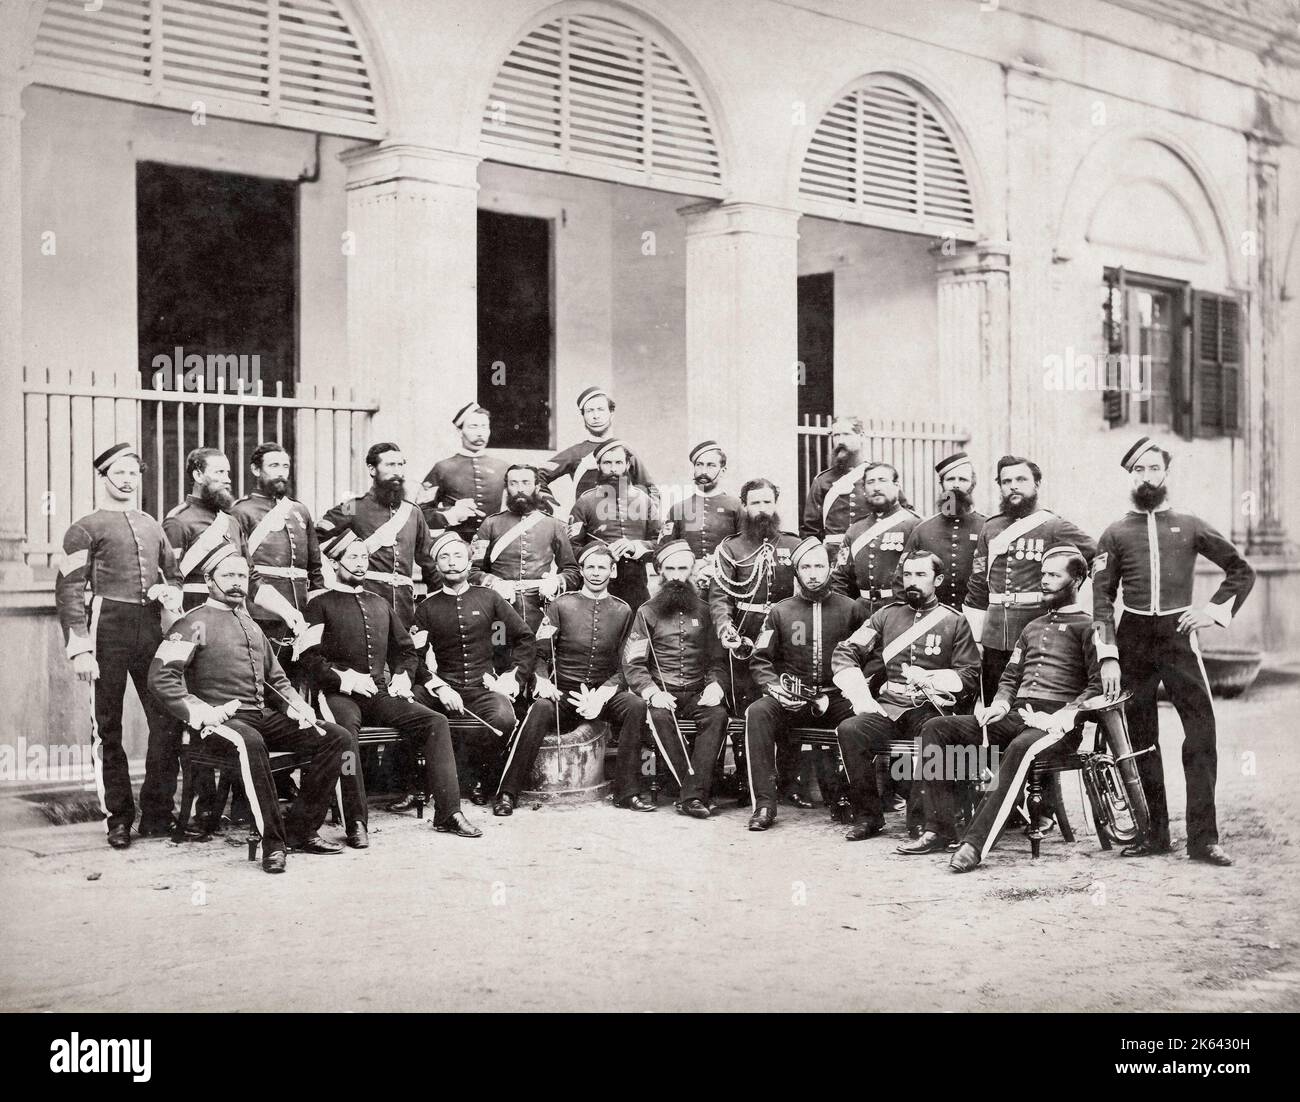 Vintage 19th century photograph - British army in India - NCOs of the 2nd Dragoon Guards, 1866 Stock Photo